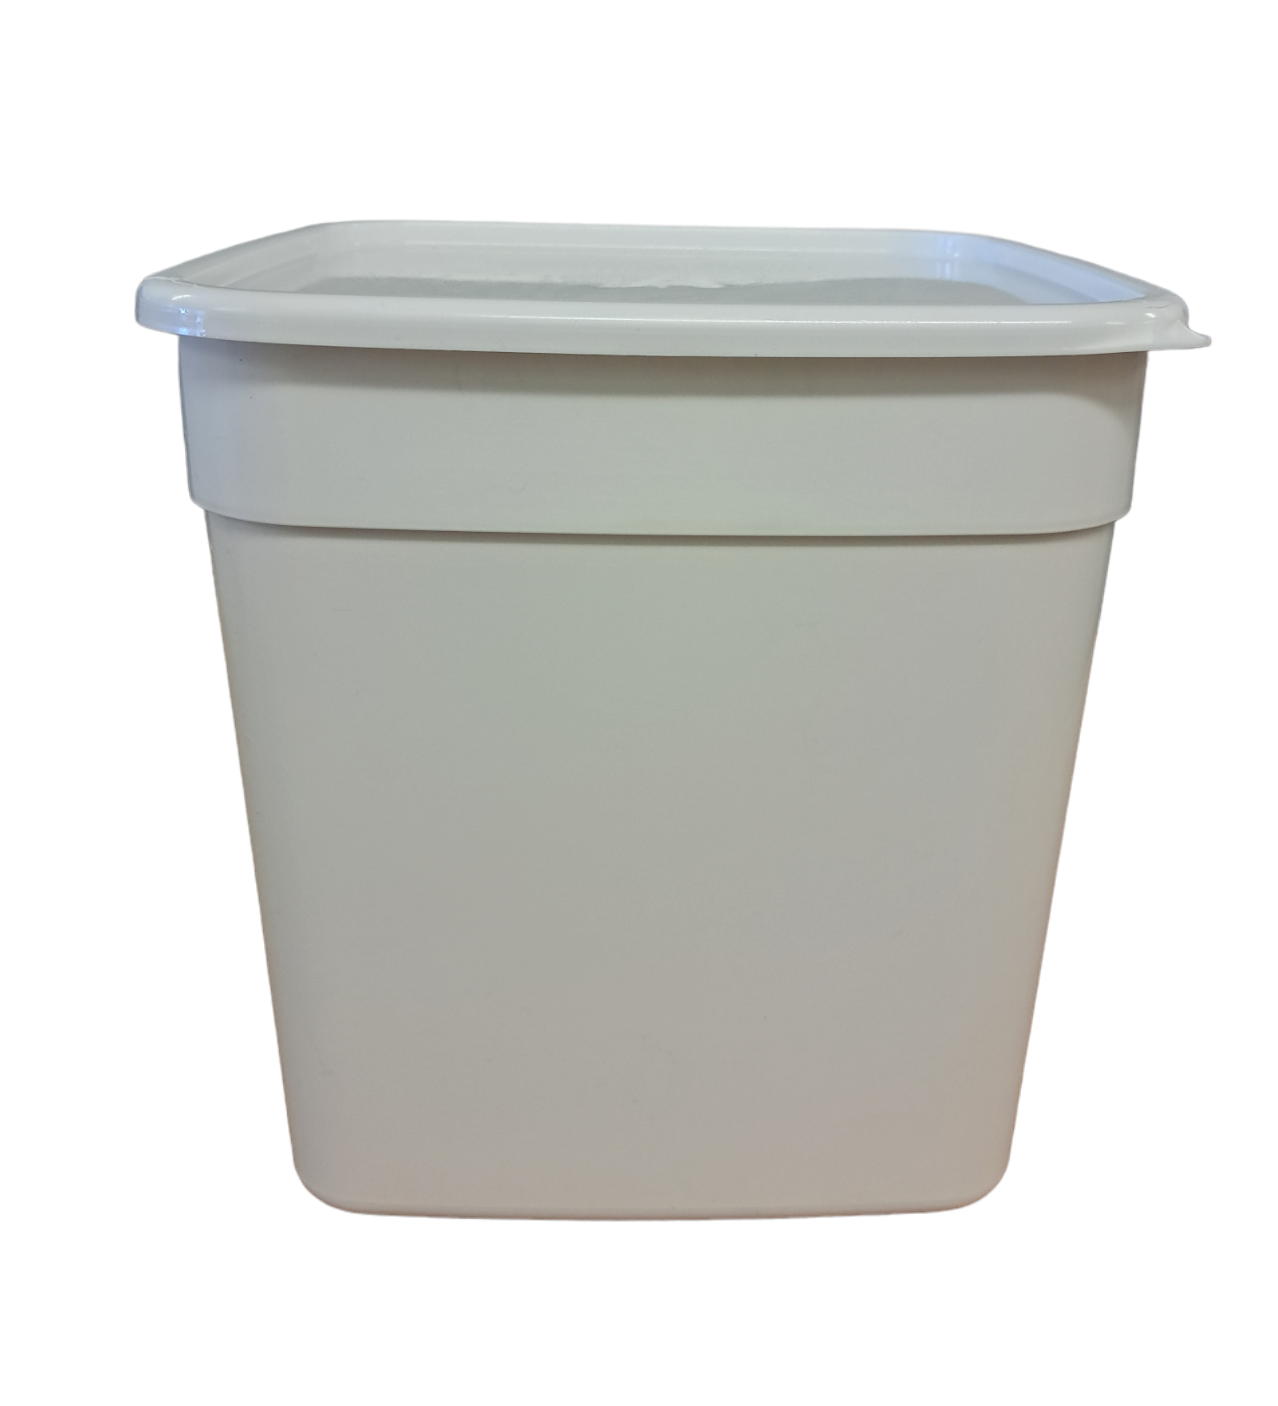 10 litre standard container with lid - White